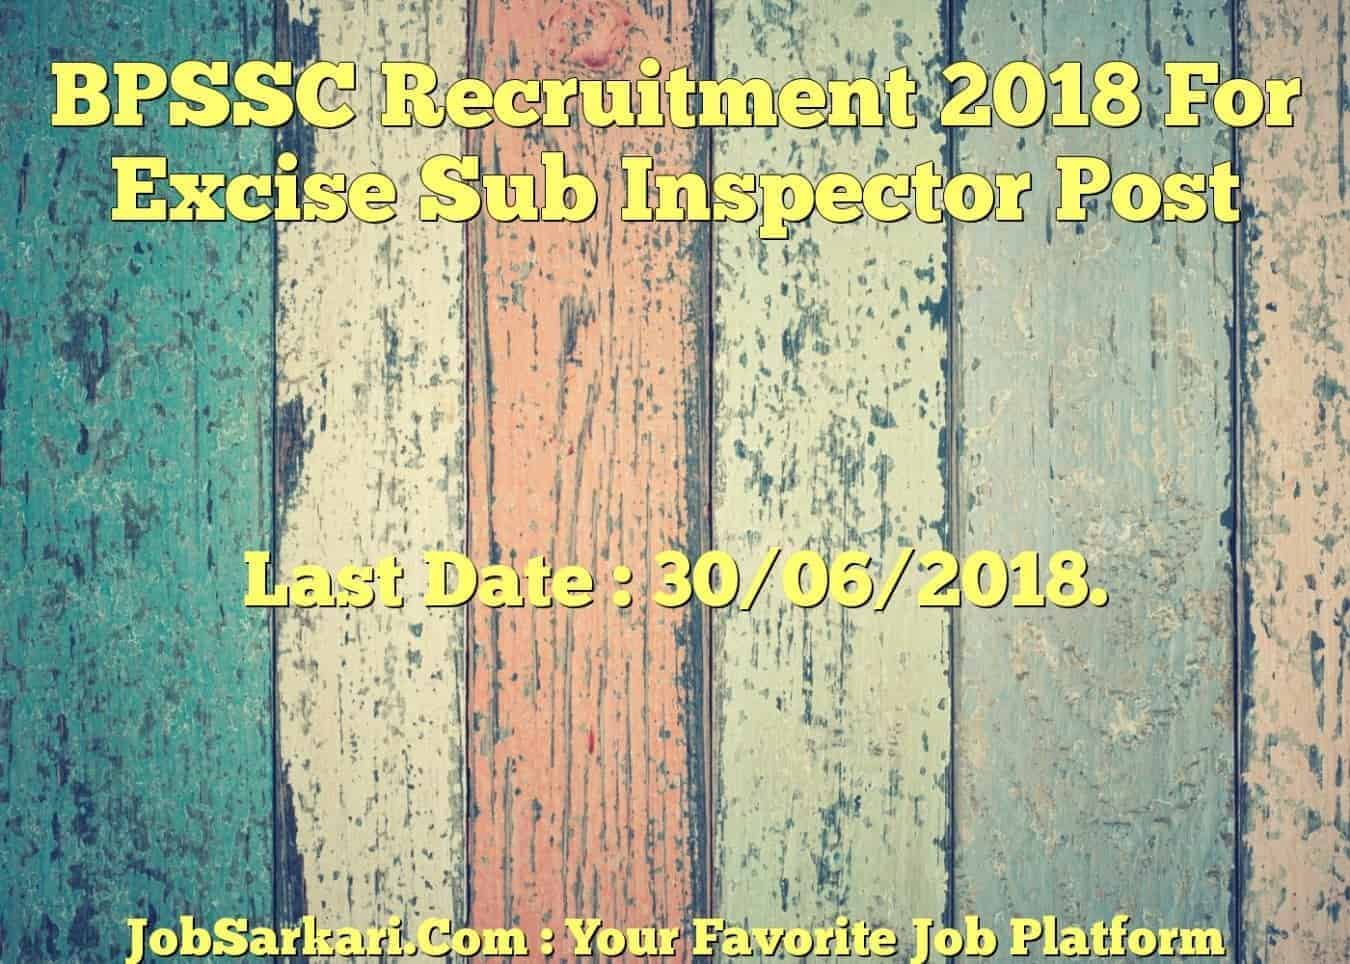 BPSSC Recruitment 2018 For Excise Sub Inspector Post